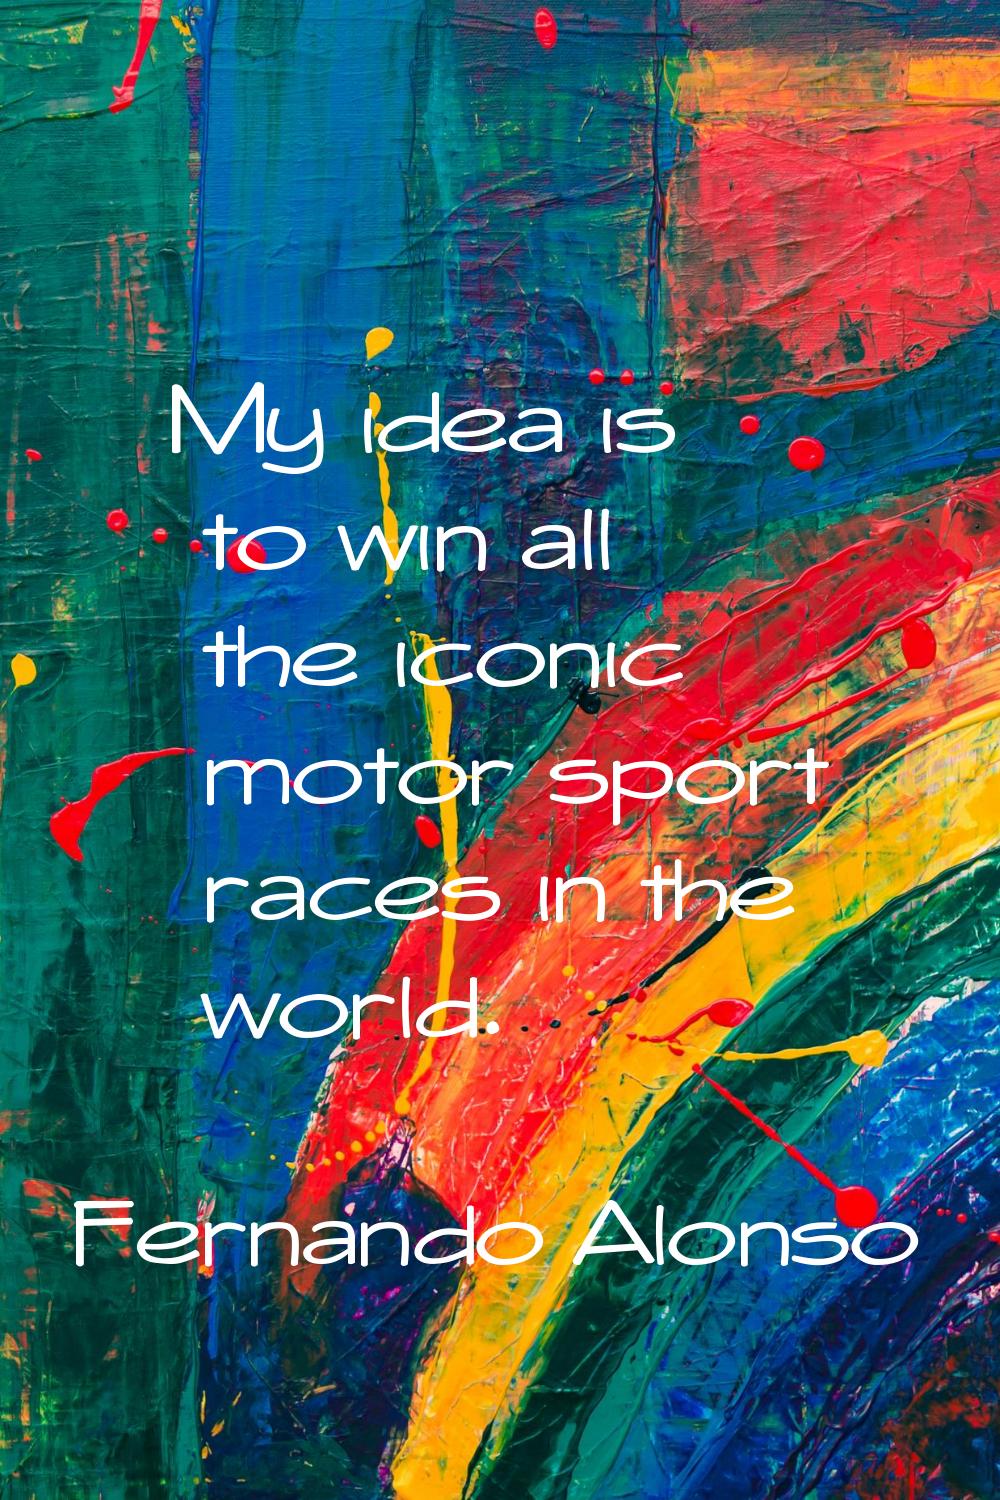 My idea is to win all the iconic motor sport races in the world.